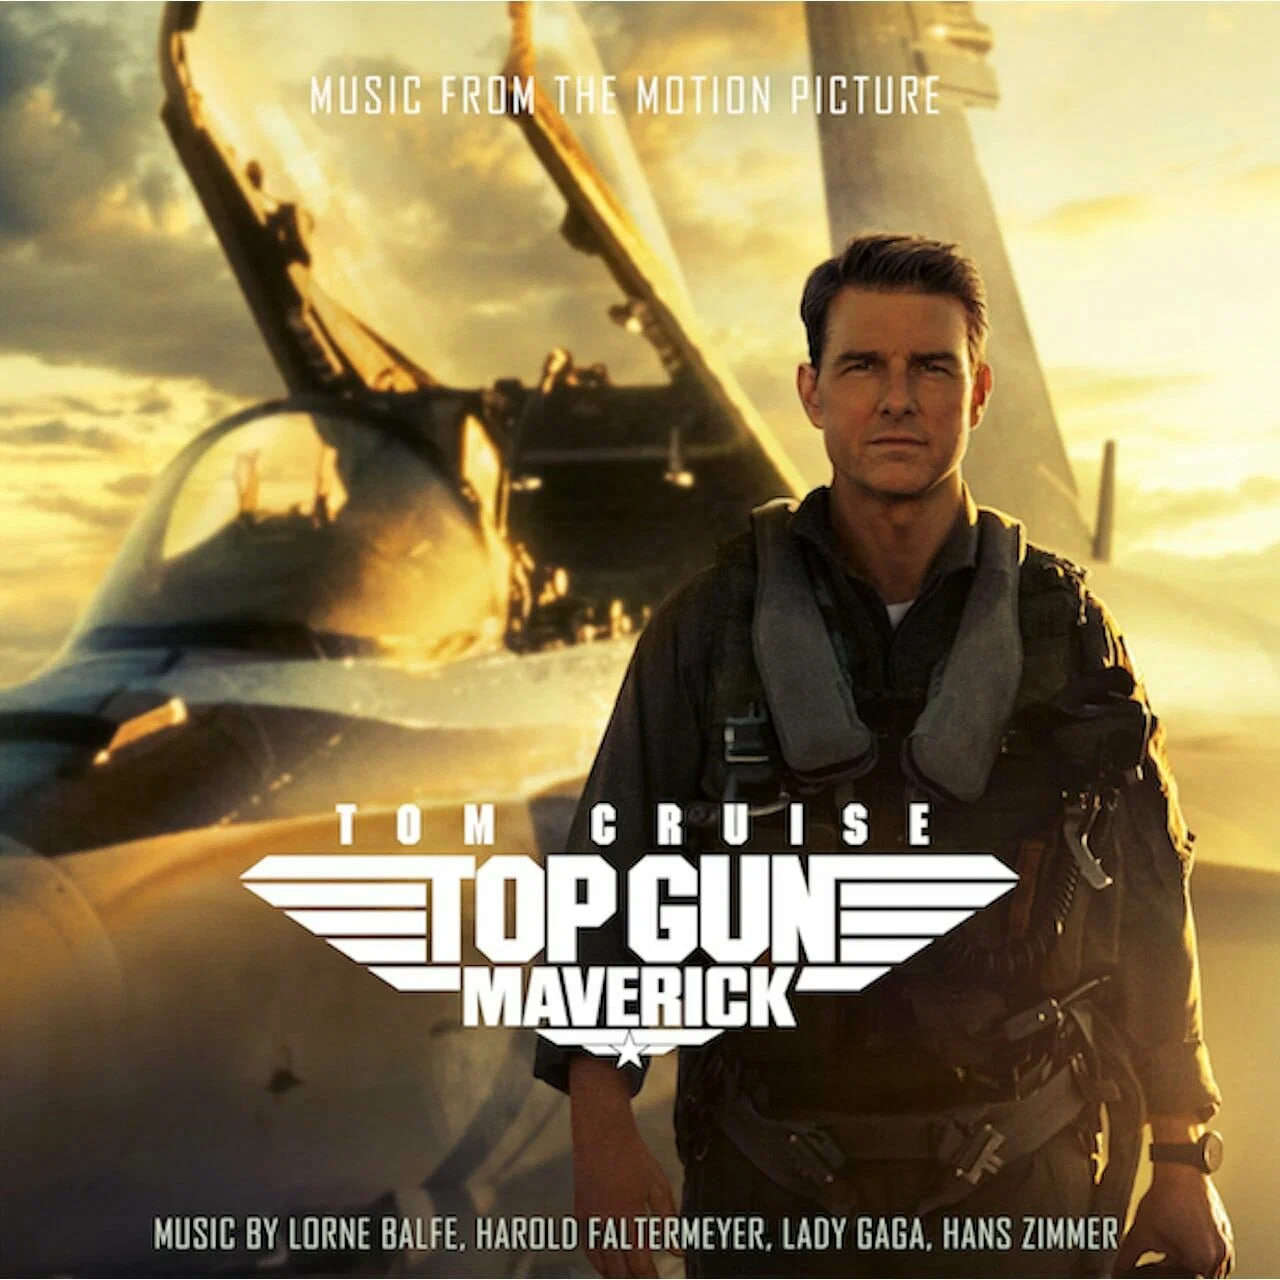 Саундтрек Interscope Various – Top Gun: Maverick - Music From The Motion Picture (White Vinyl LP) рок hollywood records various artists guardians of the galaxy vol 2 awesome mix vol 2 original motion picture soundtrack